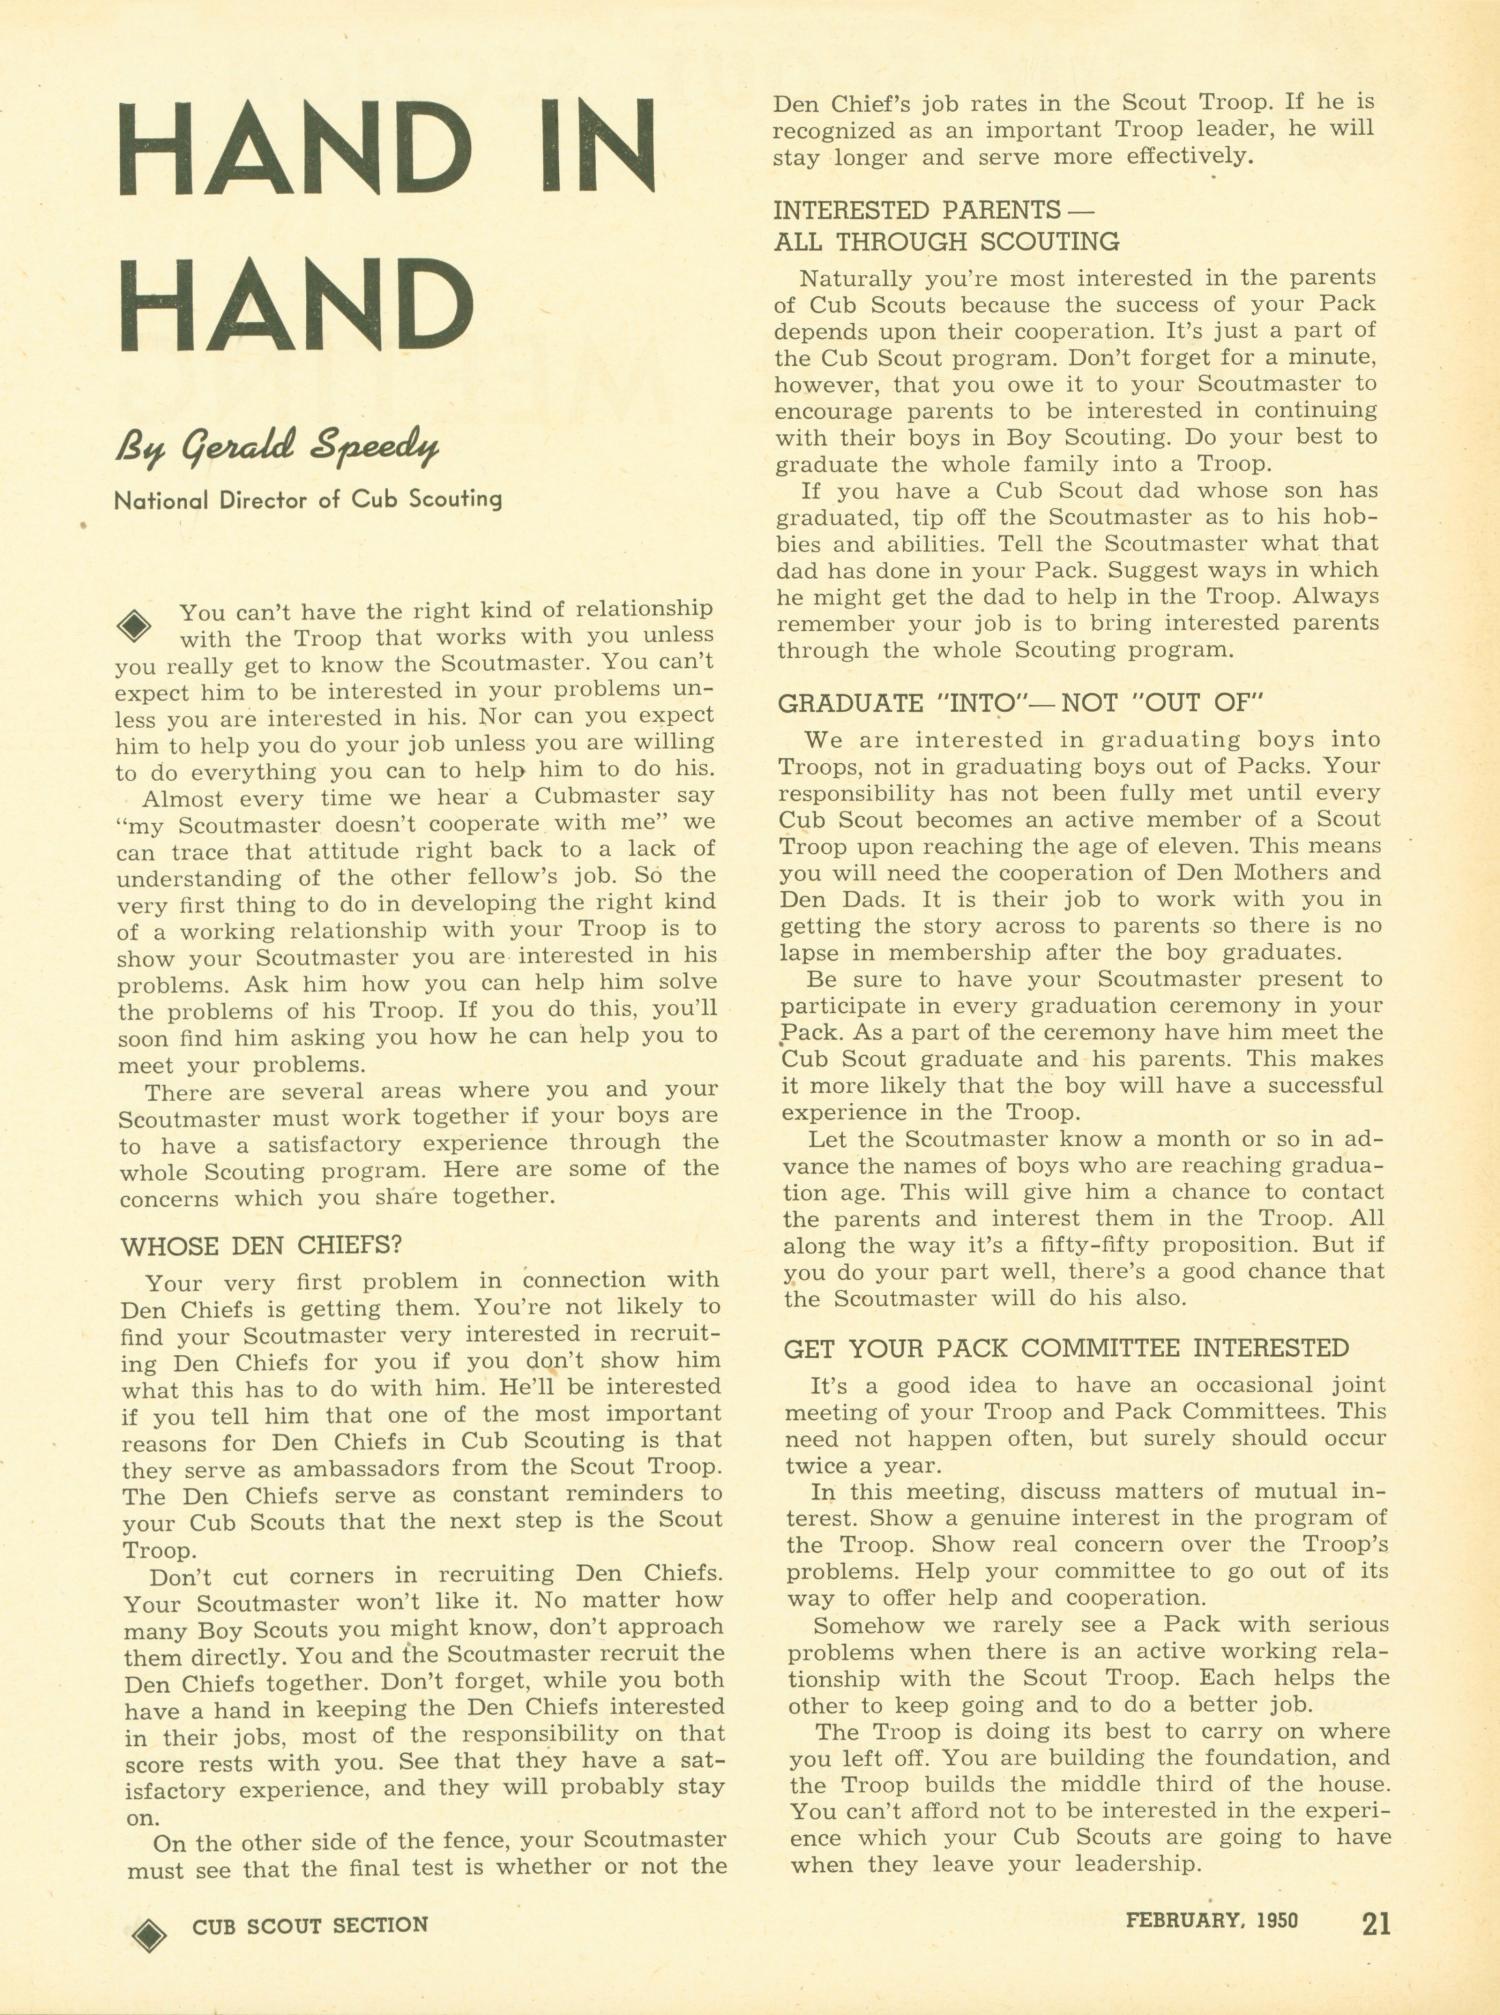 Scouting, Volume 38, Number 2, February 1950
                                                
                                                    21
                                                